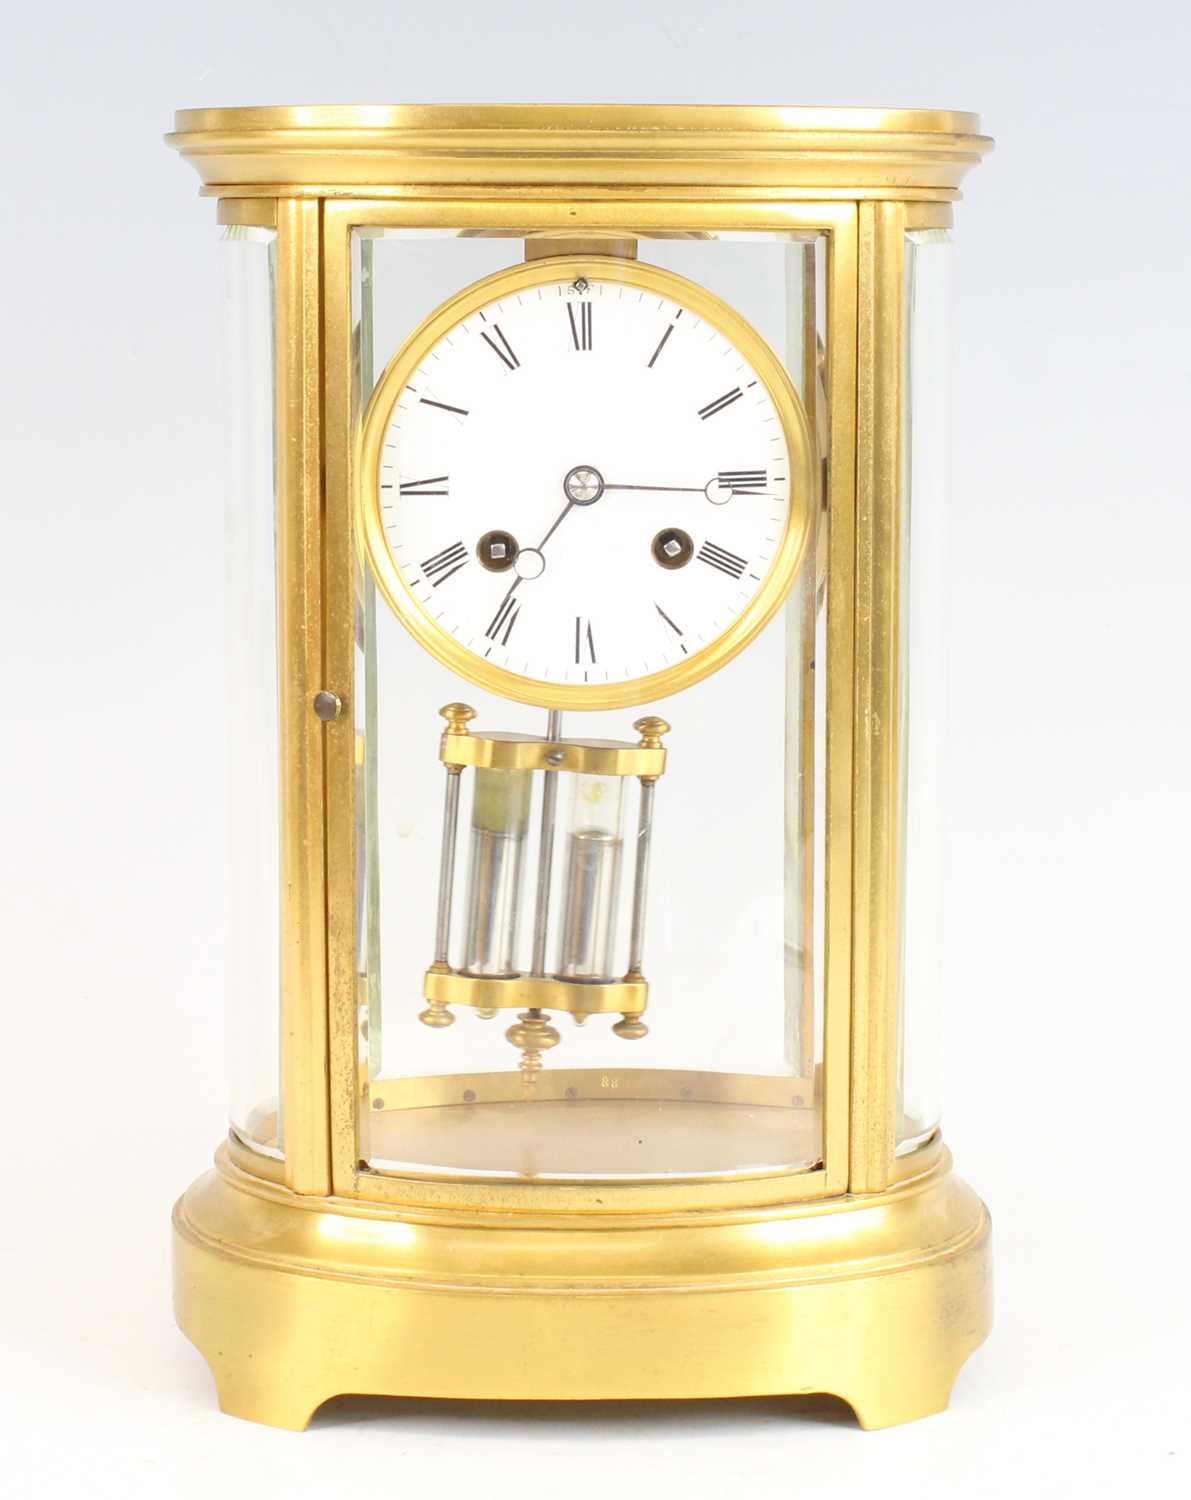 A late 19th century French gilt brass four-glass mantel clock by Gabe Vicarino & Co of Paris, having